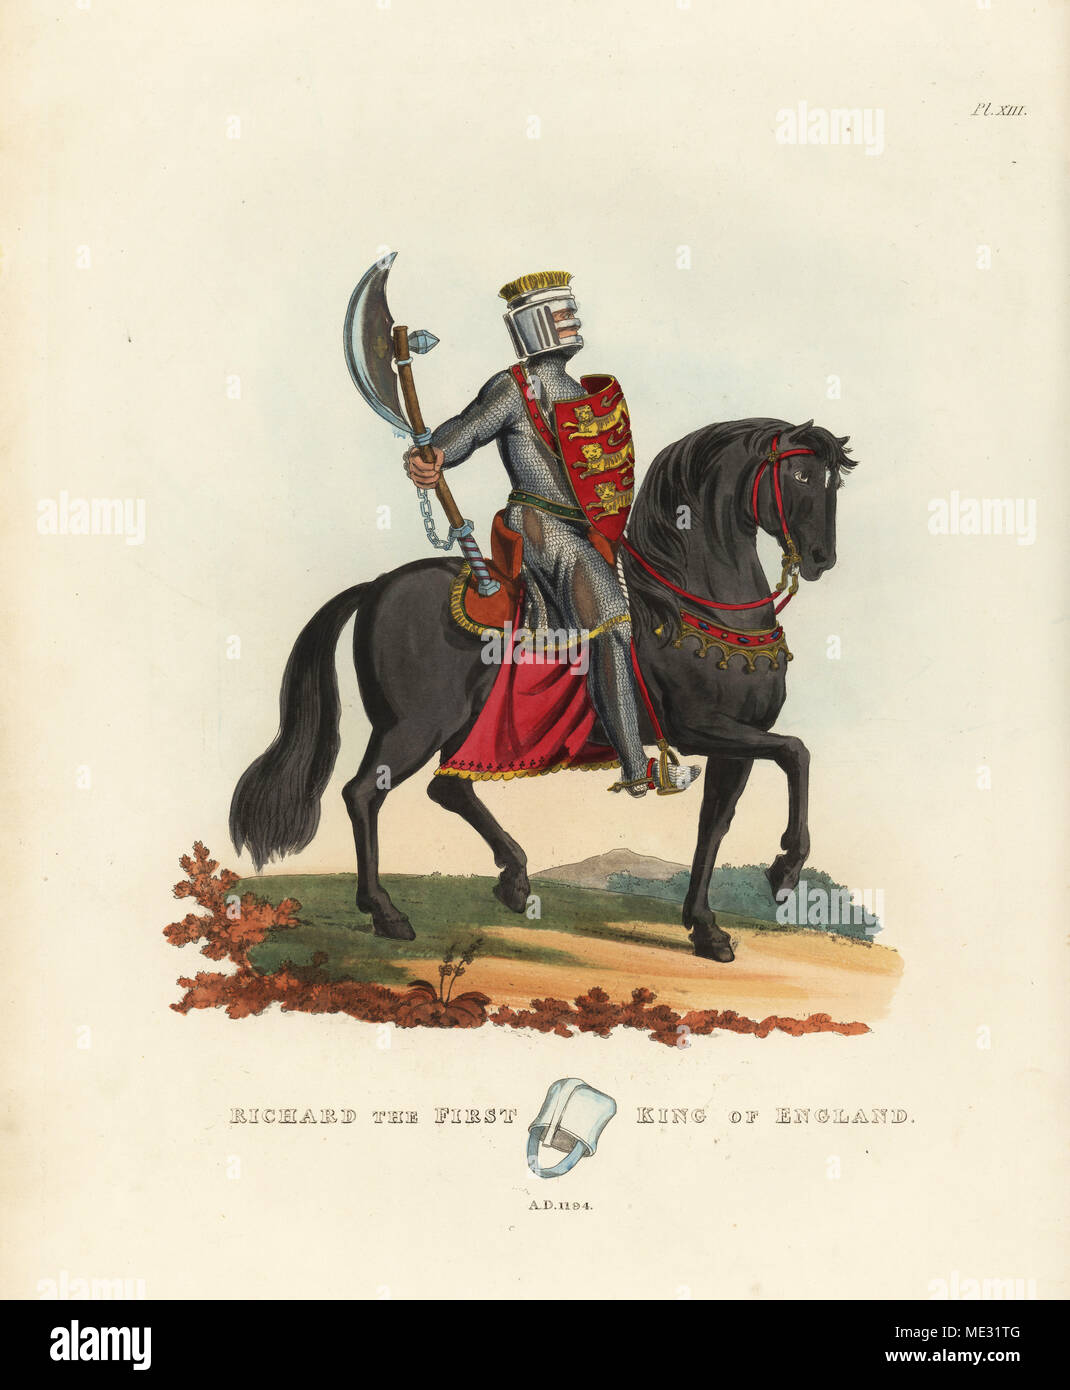 Richard I, King of England, Richard the Lionheart, 1194. He wears a cylindrical helm, hauberk and chausses, holding a battle axe and shield with three lions. Handcoloured lithograph after an illustration by S.R. Meyrick from Sir Samuel Rush Meyrick's A Critical Inquiry into Antient Armour, John Dowding, London, 1842. Stock Photo